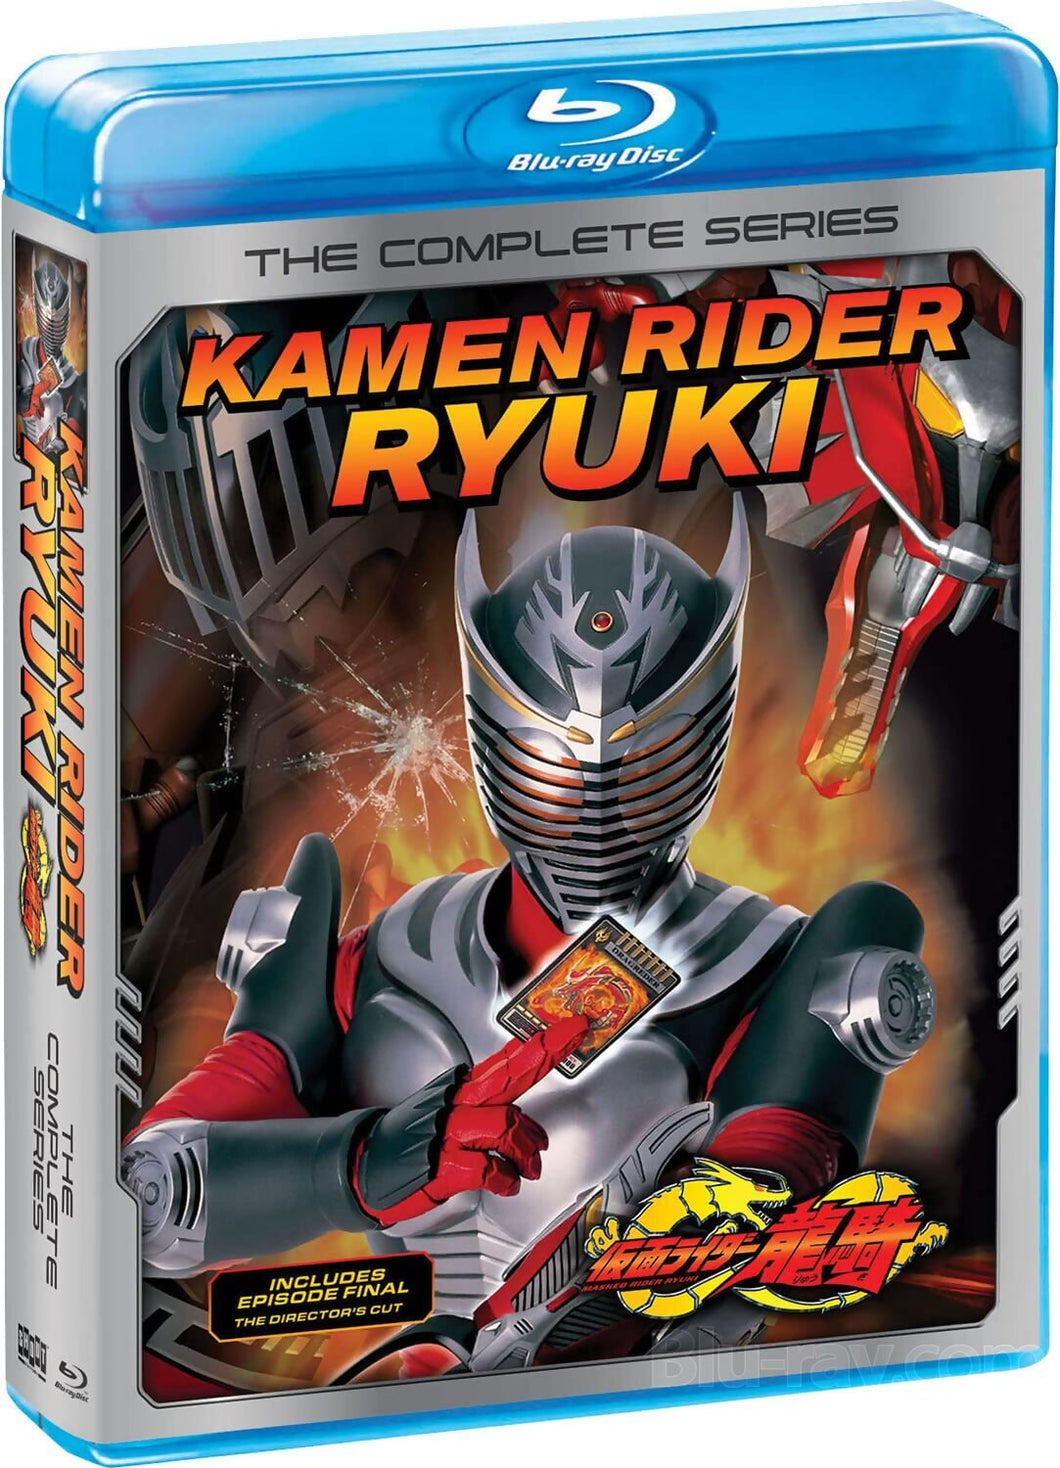 Kamen Rider Ryuki: The Complete Series (2002-2003) - front cover